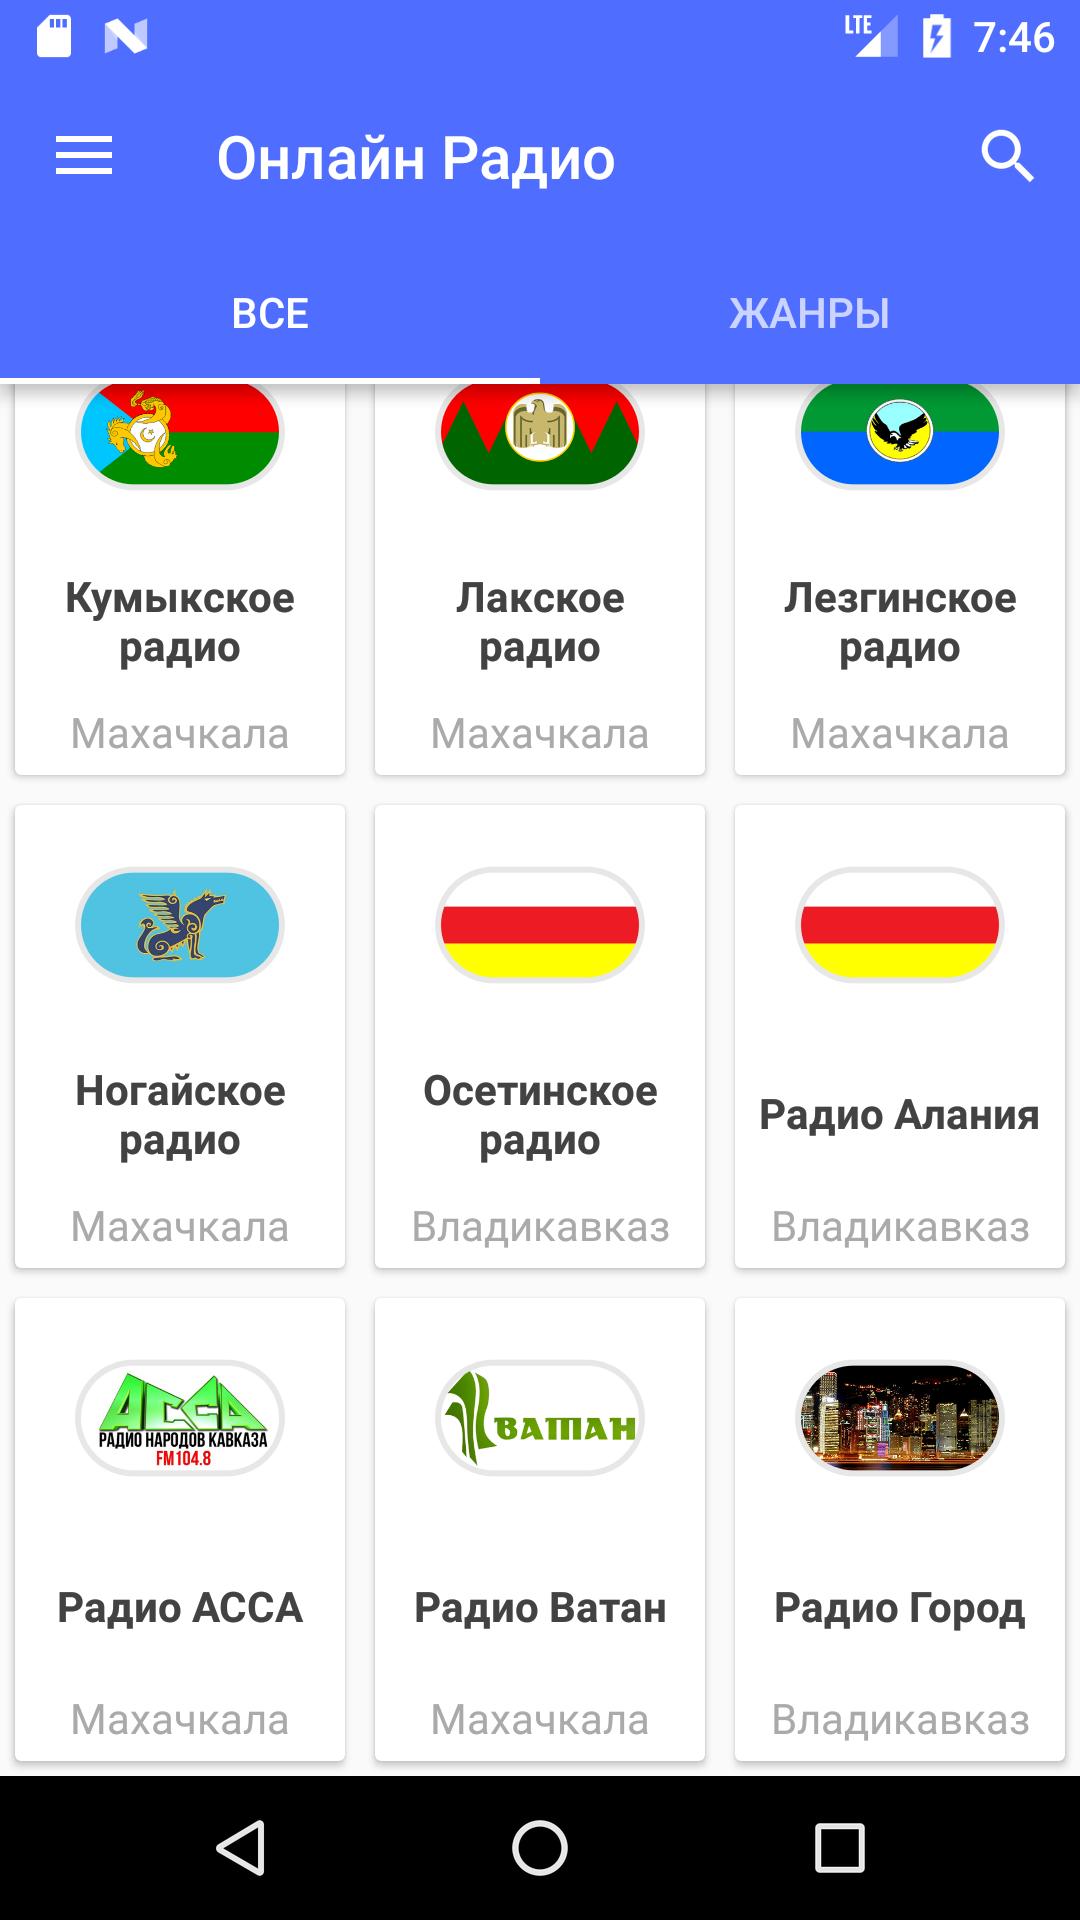 Онлайн Радио for Android - APK Download